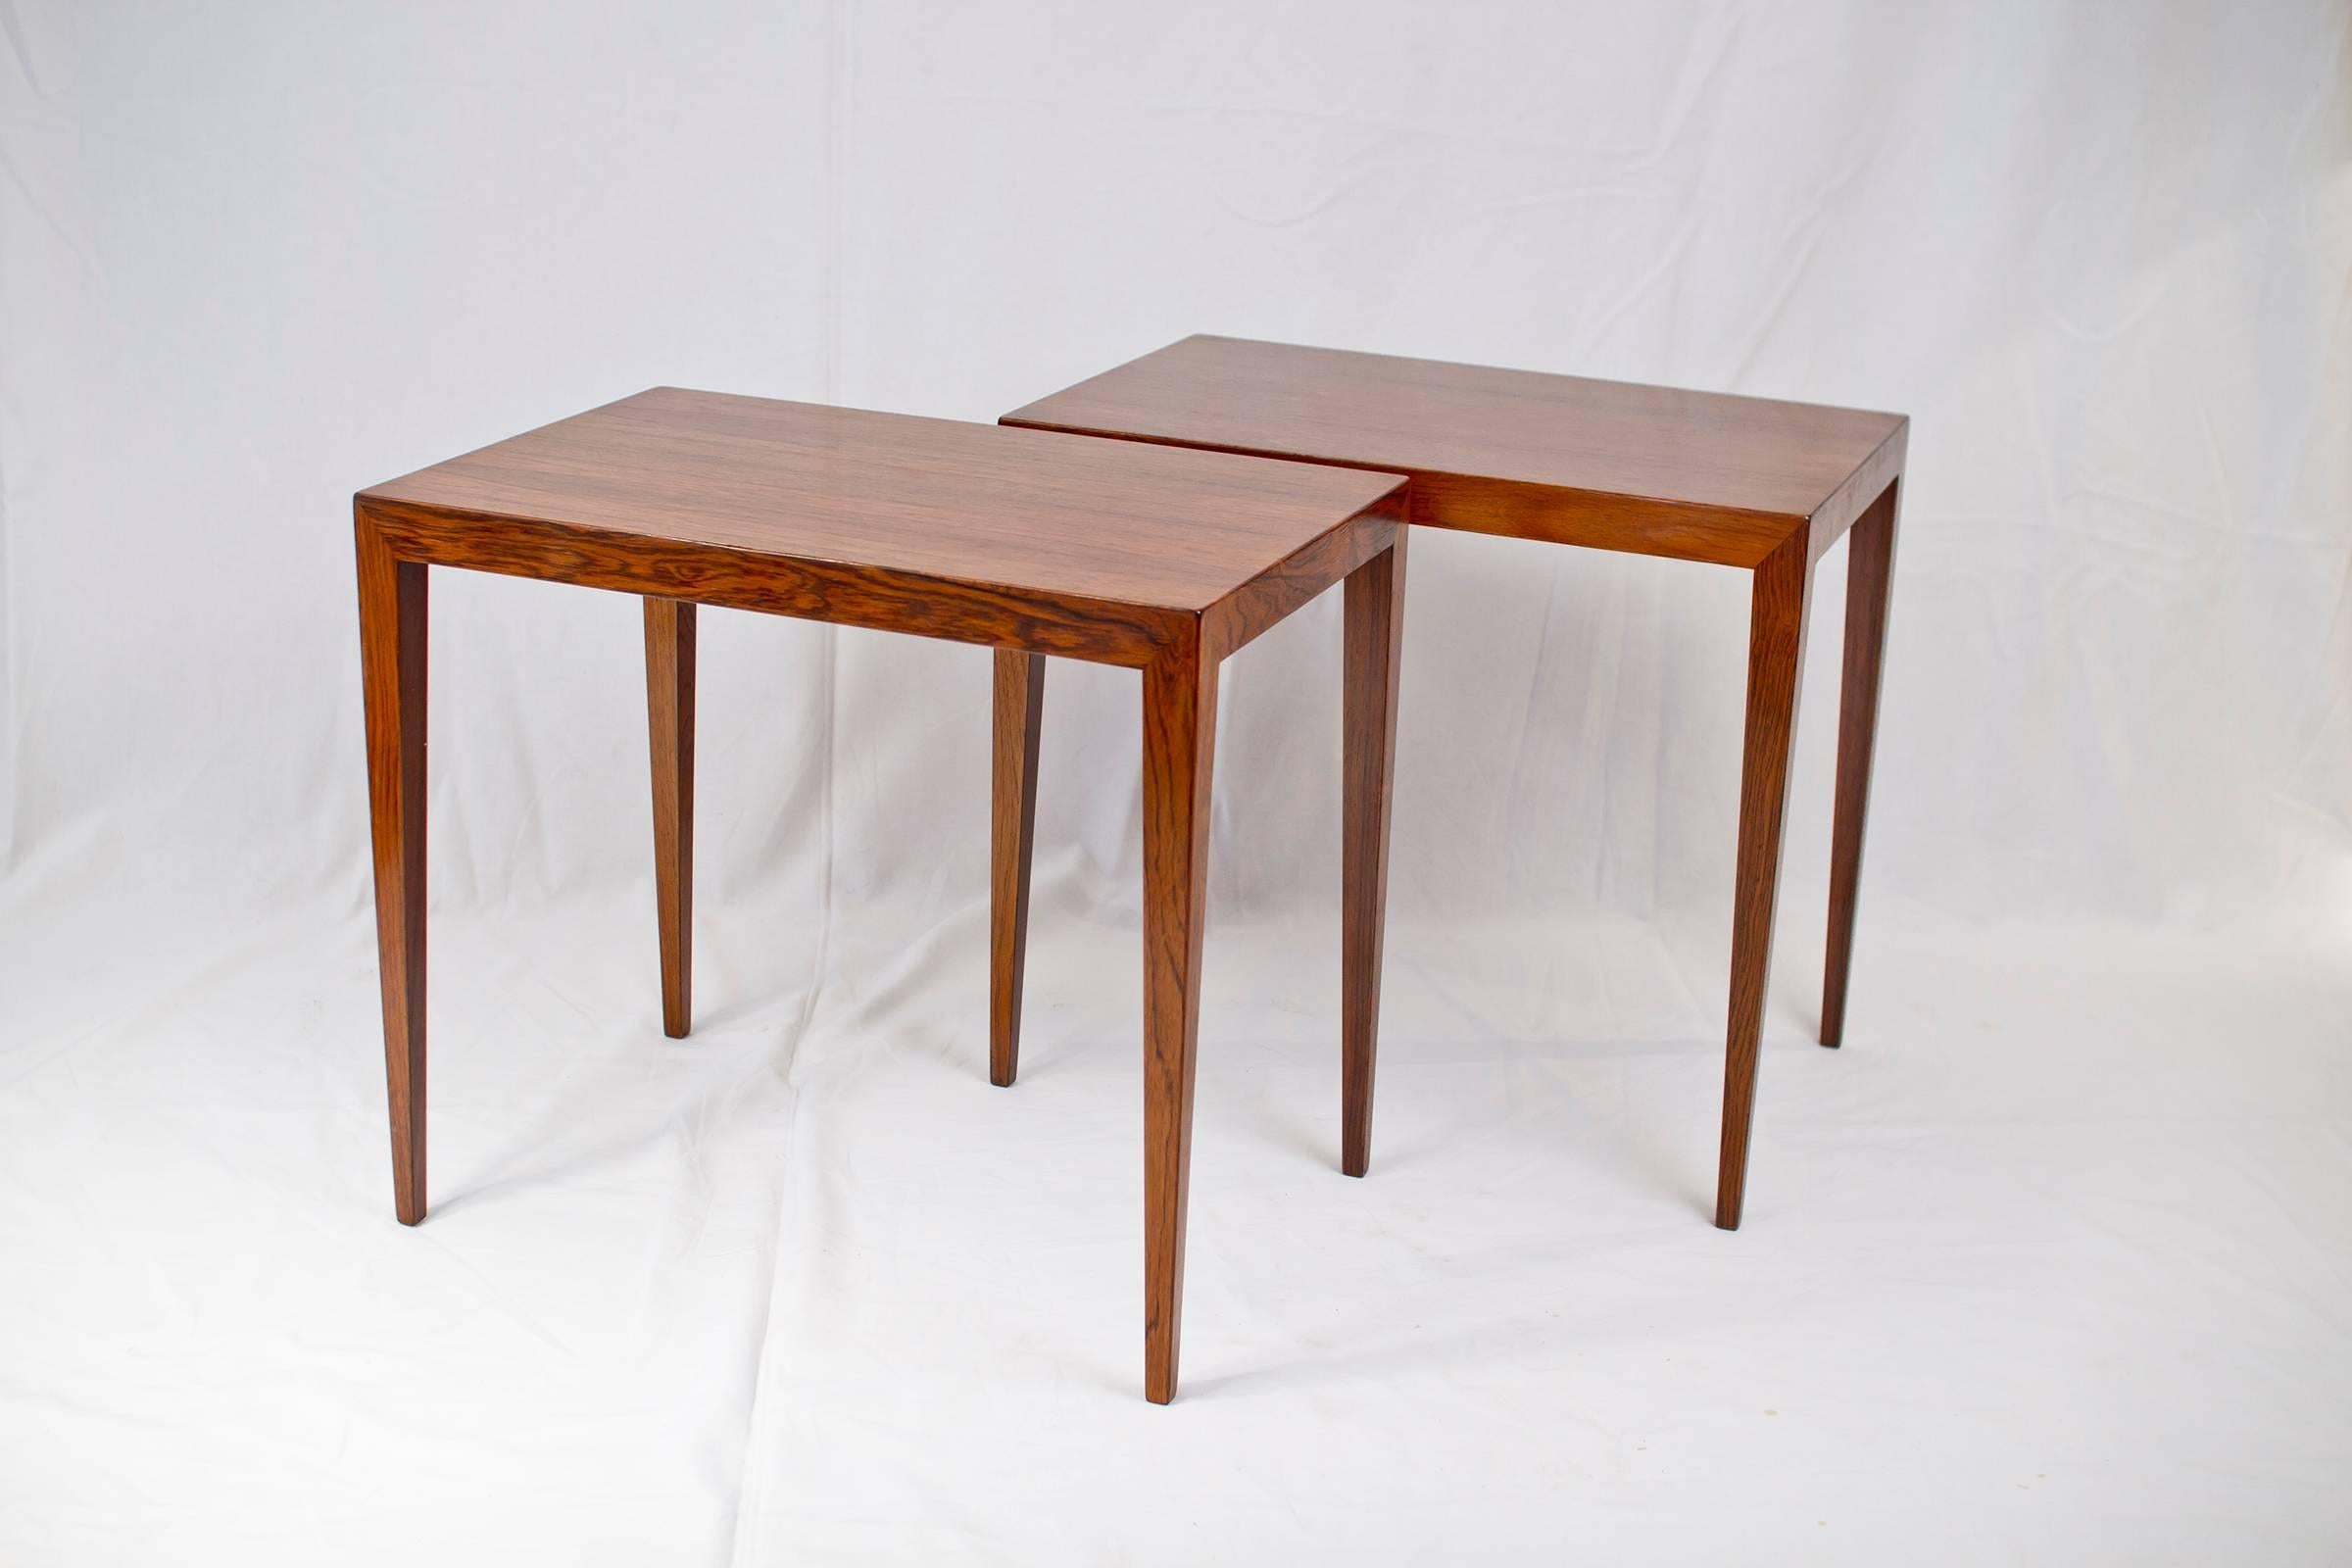 Pair of Brazilian rosewood side tables by Severin Hansen designed in 1955 and made in the 1950s by Haslev Møbelsnedkeri.

Please contact us for delivery details.